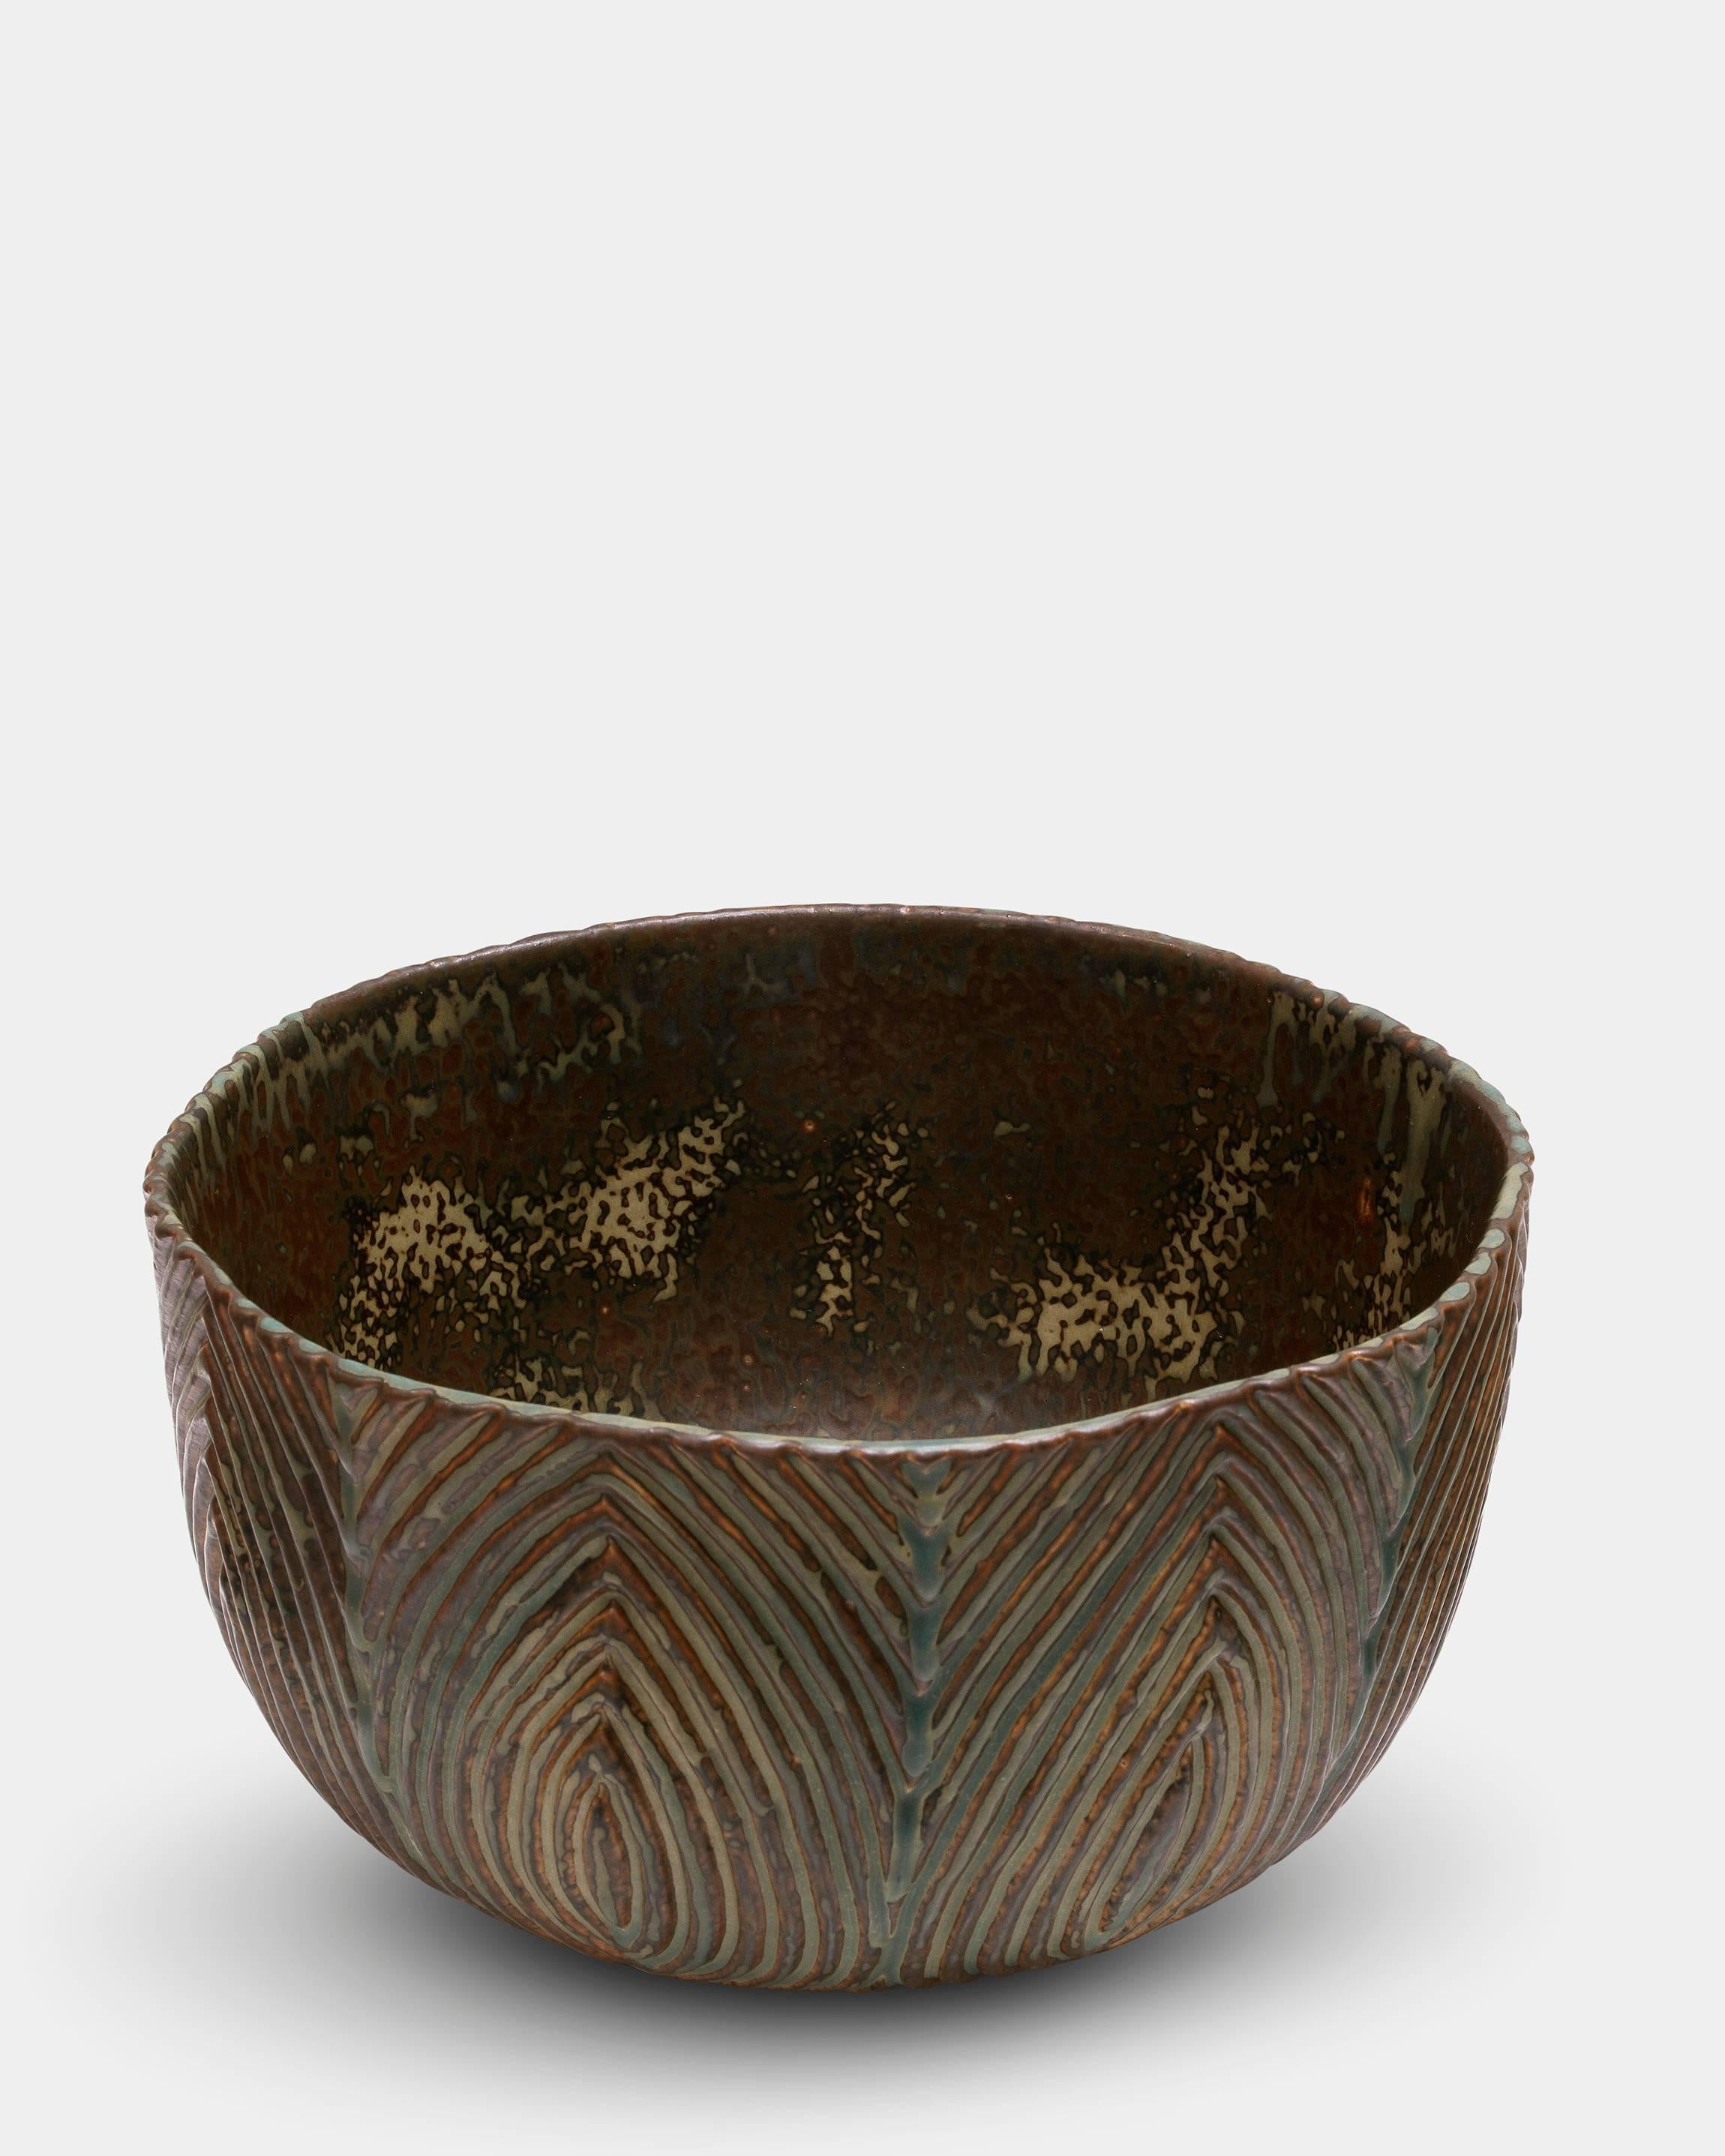 Axel Salto (1889-1961)

Large stoneware bowl by the internationally known and demanded danish ceramist Axel Salto. 
Bowl in fluted style, decorated in Sung glaze.
Manufactured in 1963 for Royal Copenhagen. Danish mid-century original vintage